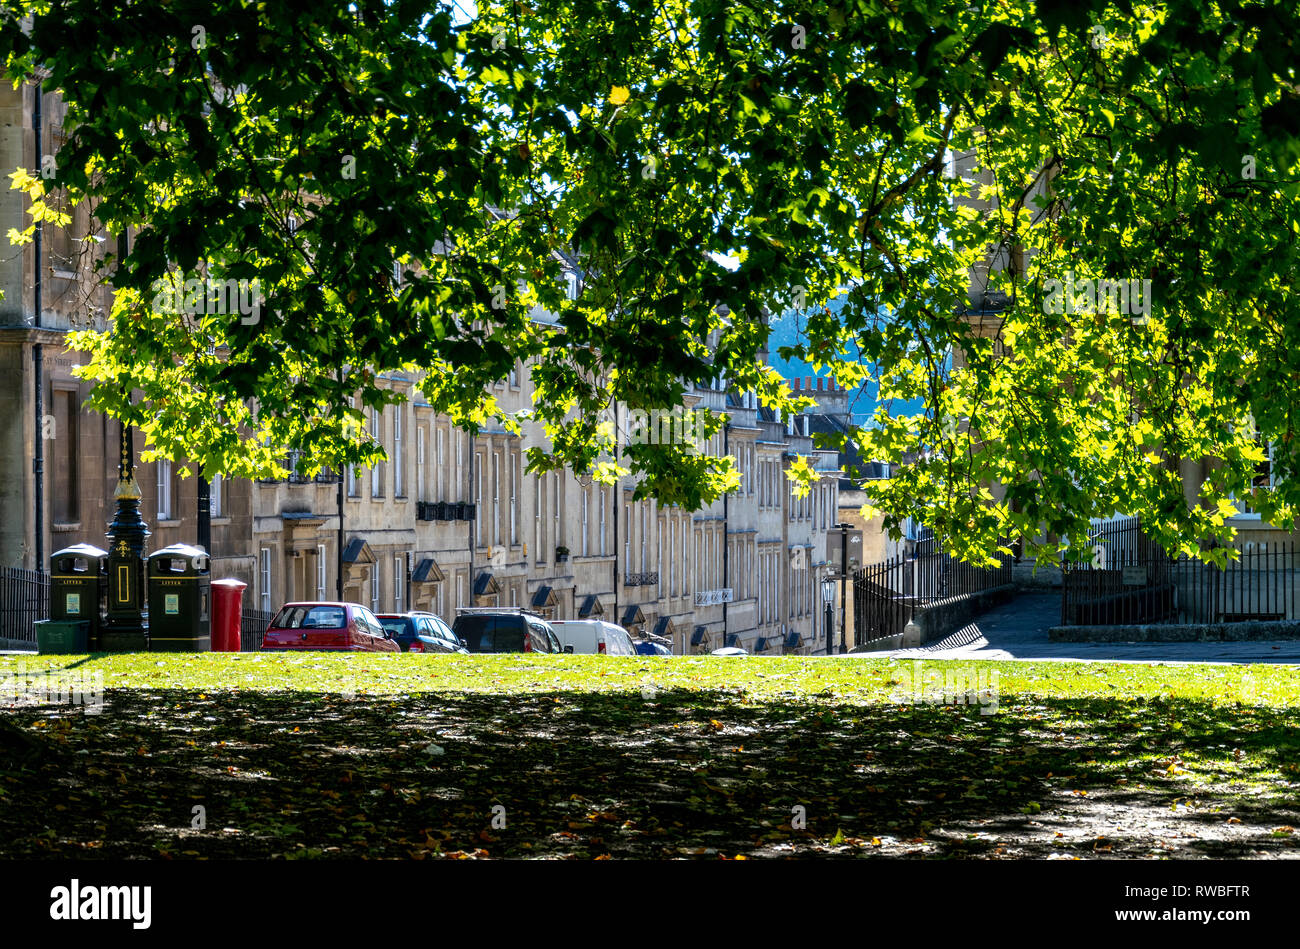 A view of the buildings in Brock Street from The Circus, Bath, England Stock Photo